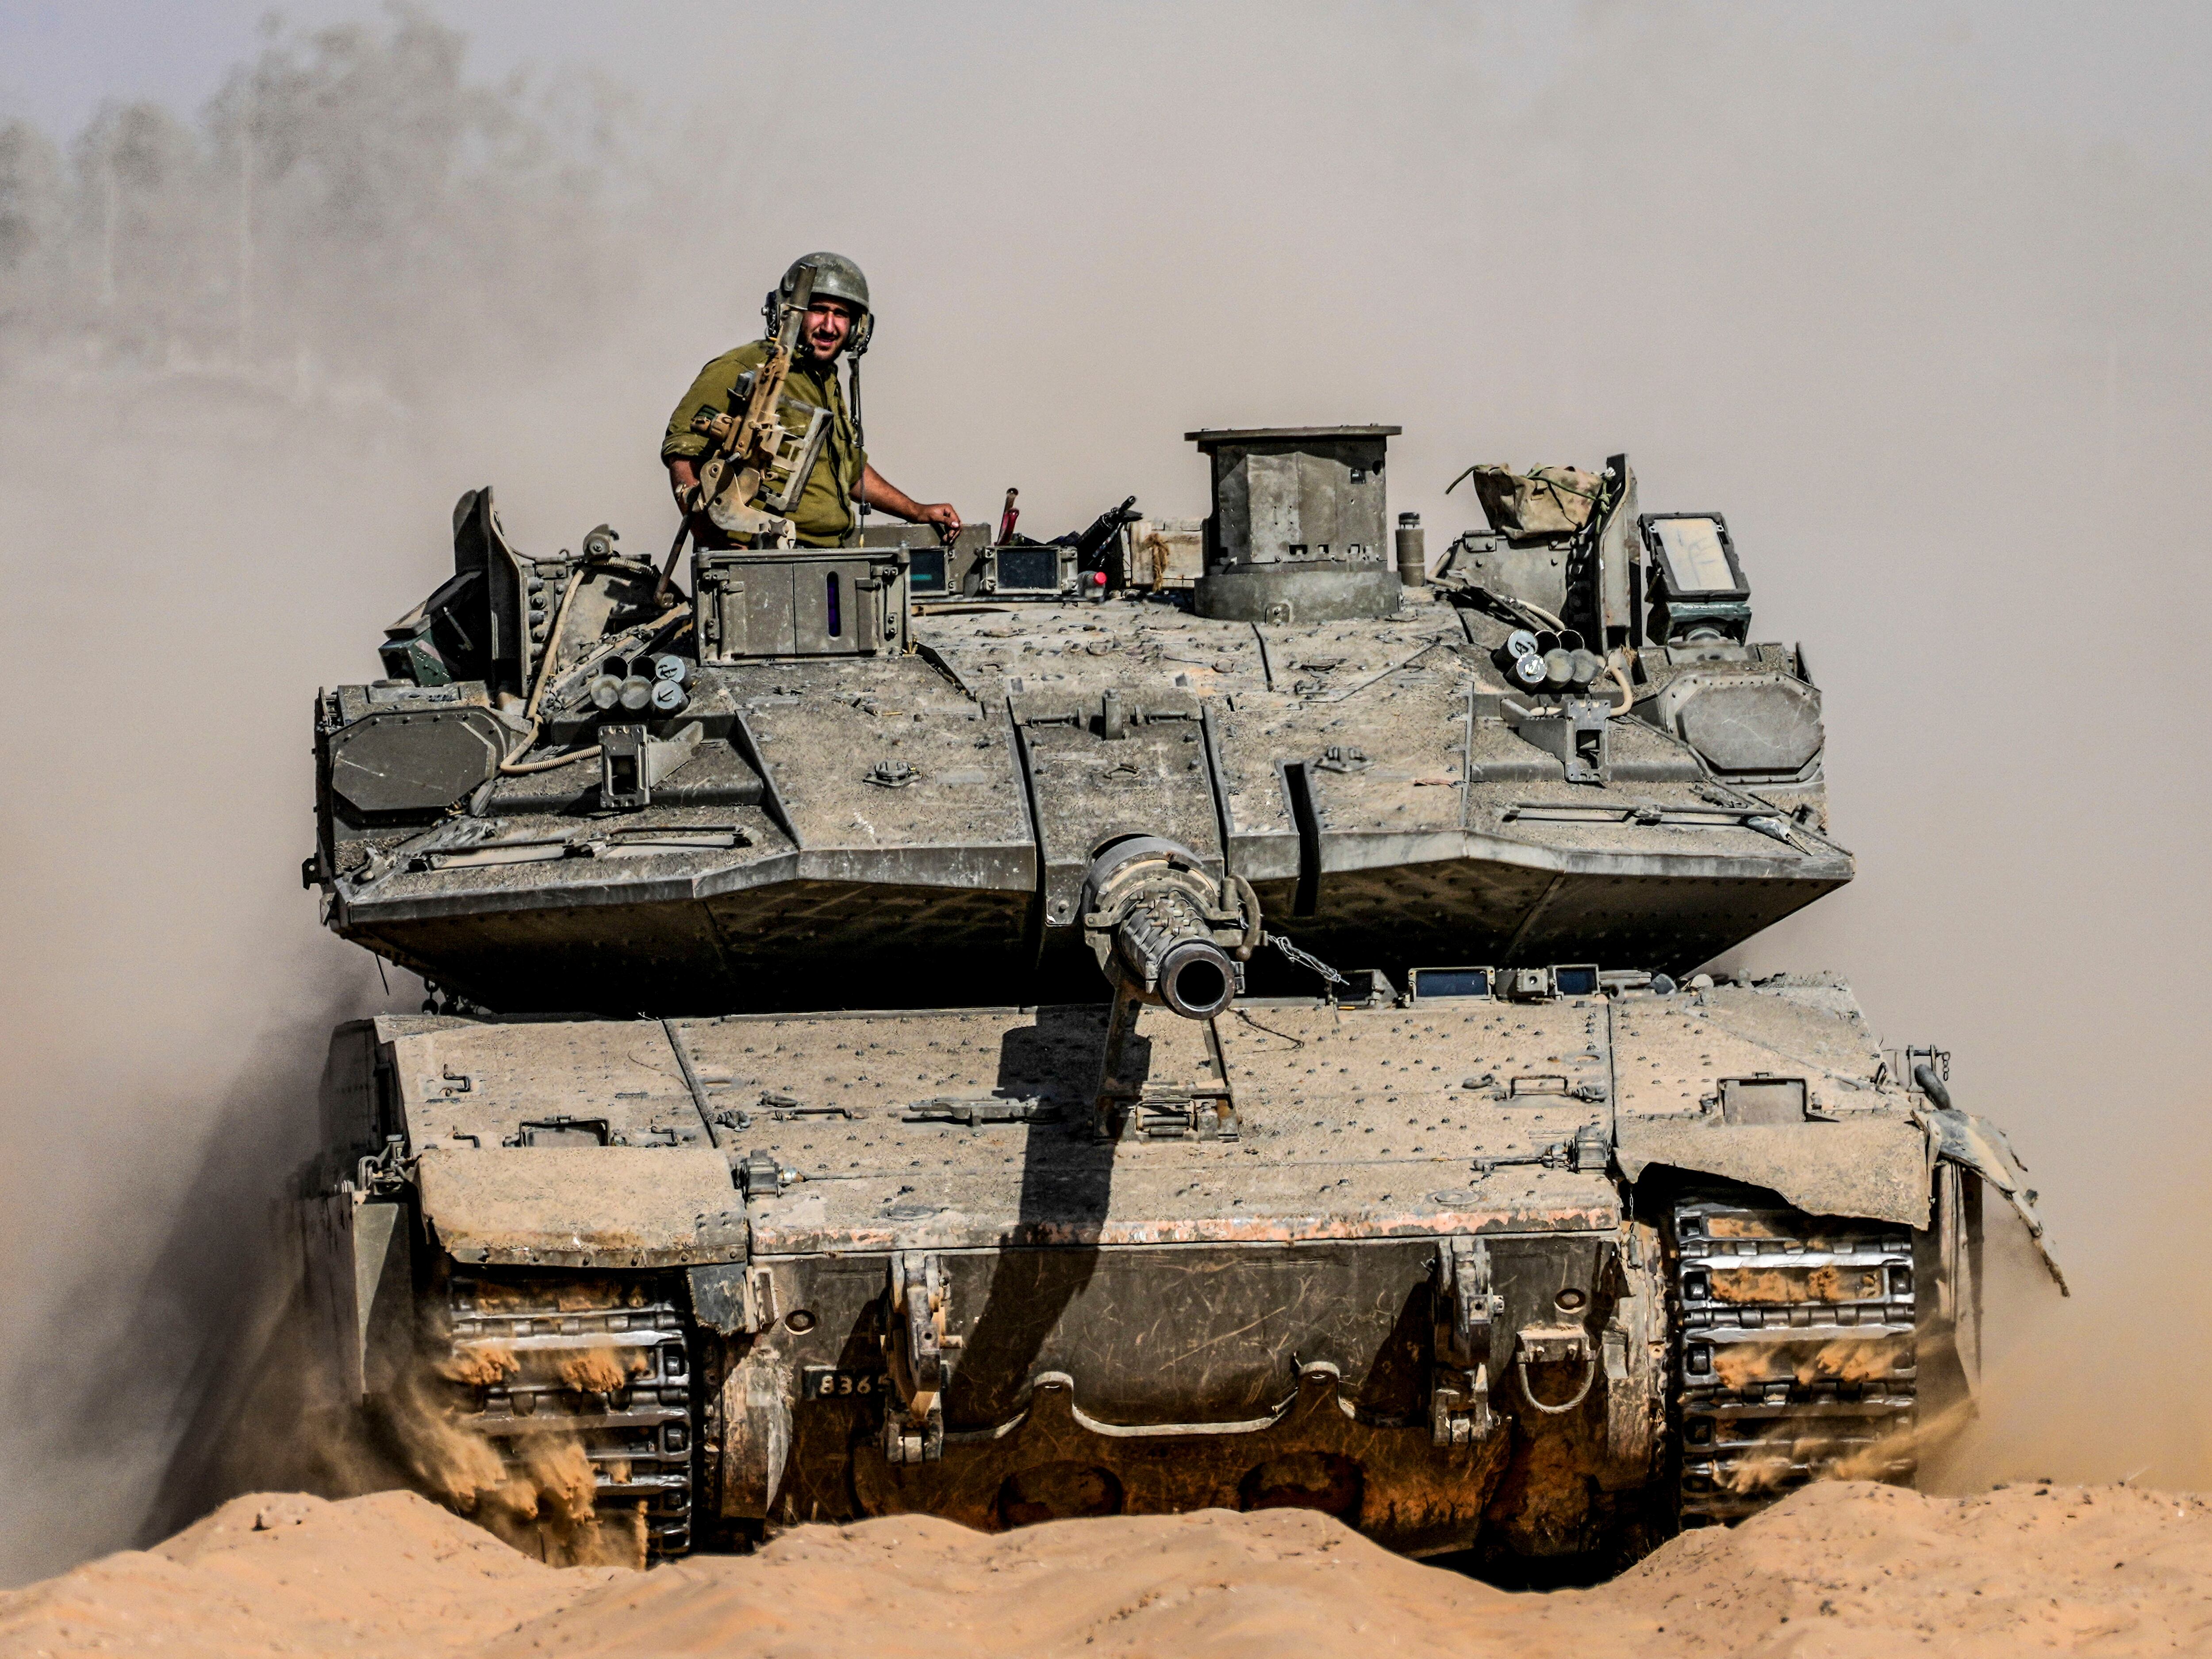 Israeli soldiers drive a tank at a staging ground near the border with the Gaza Strip, in southern Israel on Sunday.